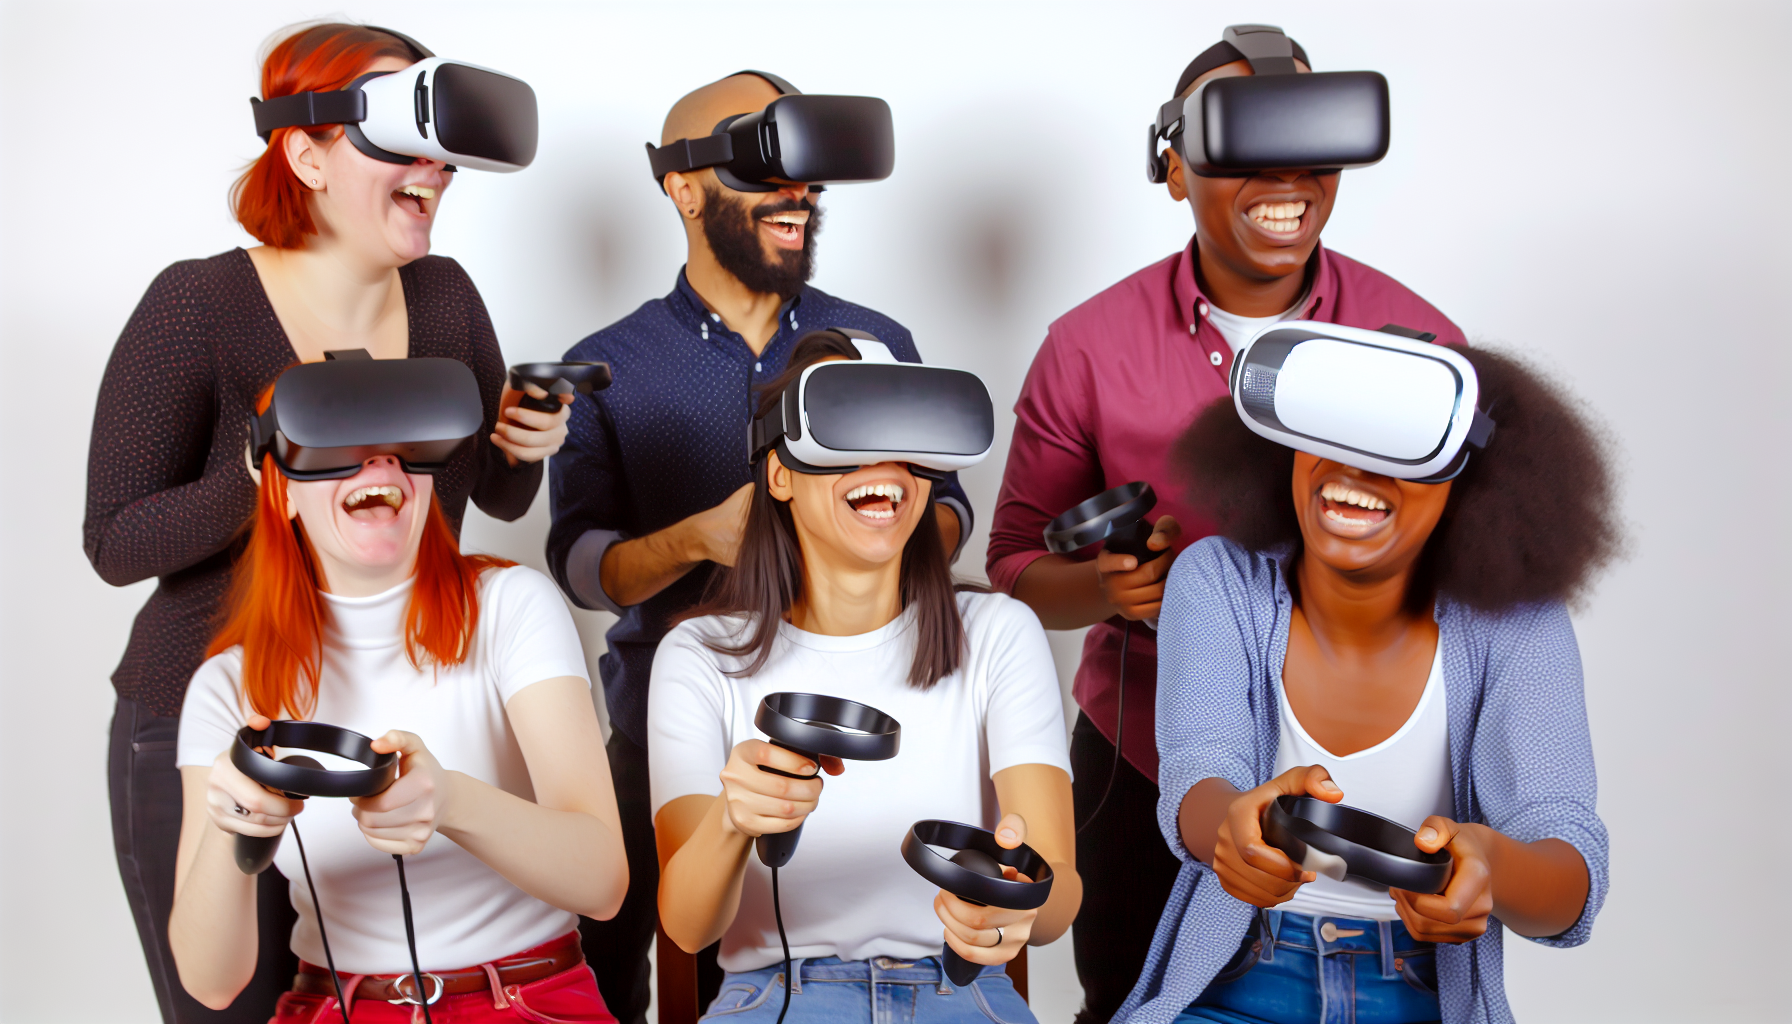 A group of friends enjoying a VR gaming experience together